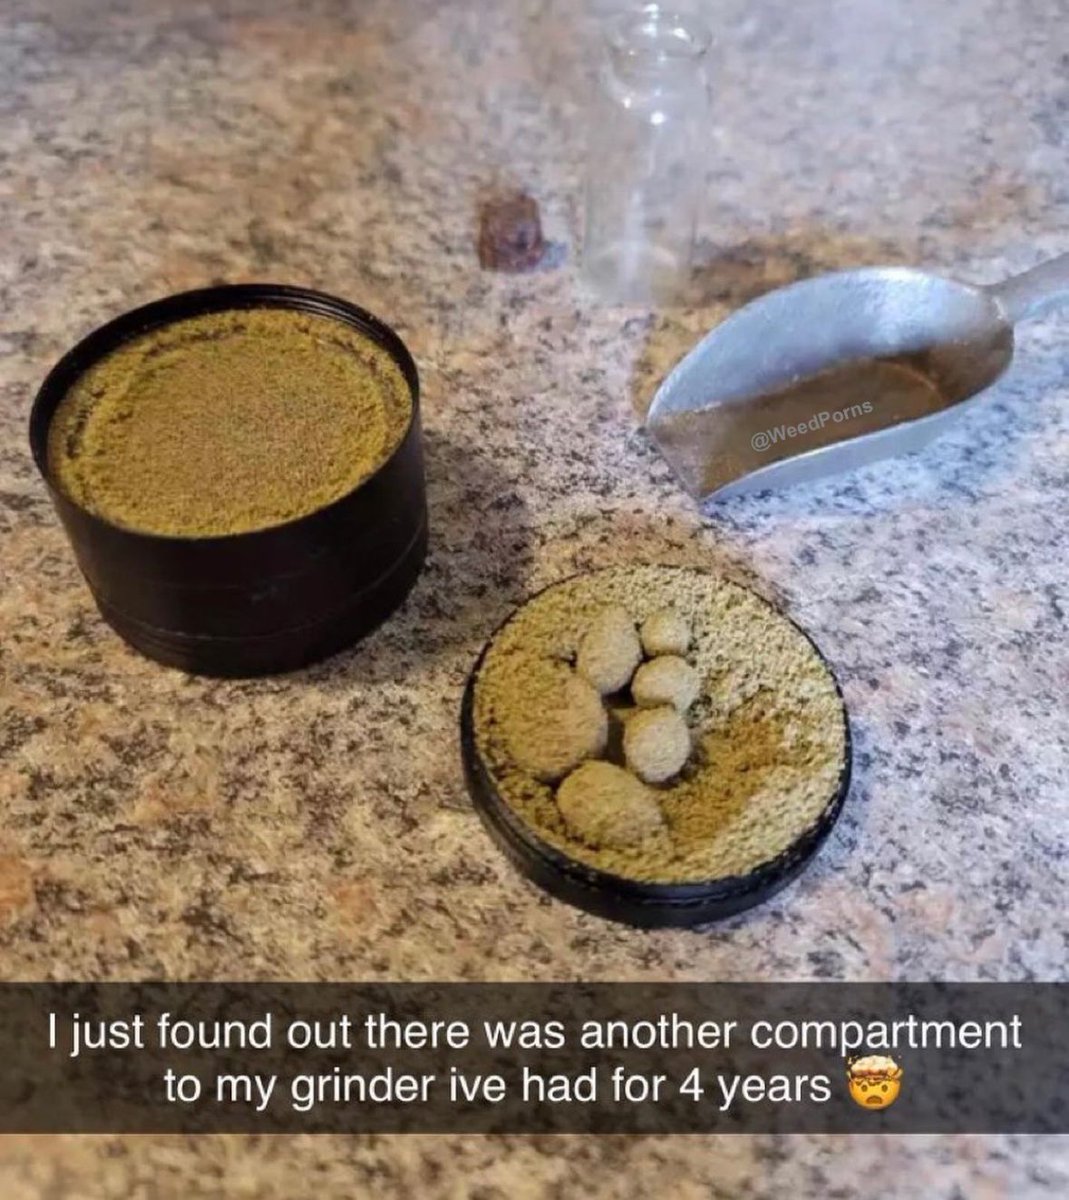 This is winning the stoner lottery